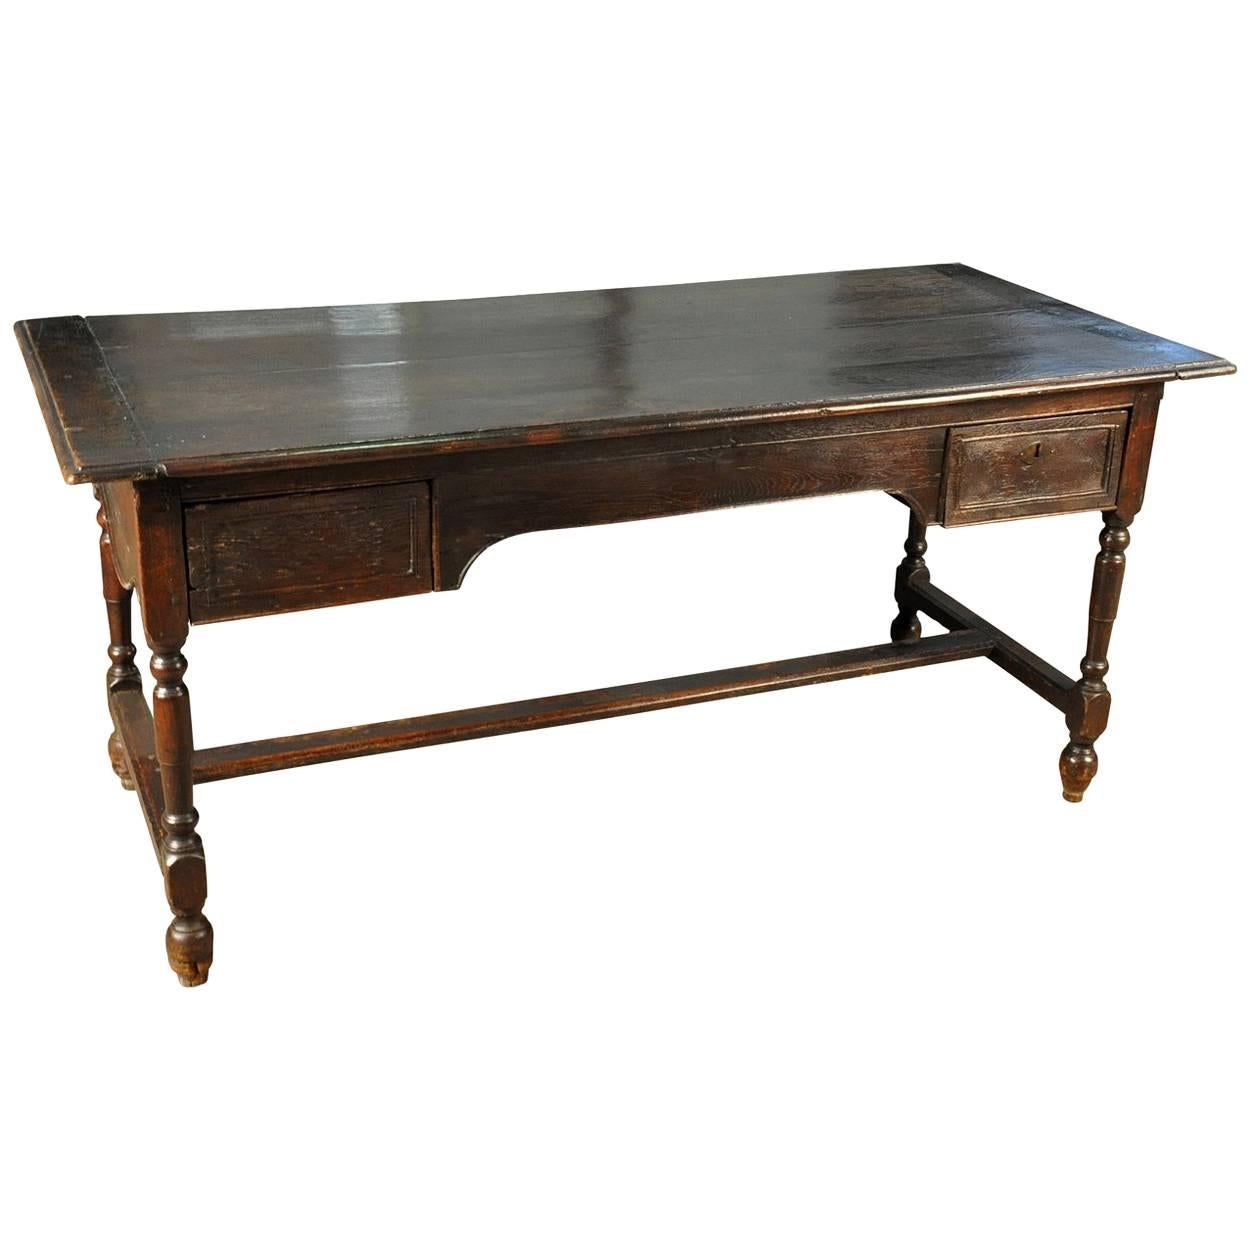 French Early 19th Century Desk